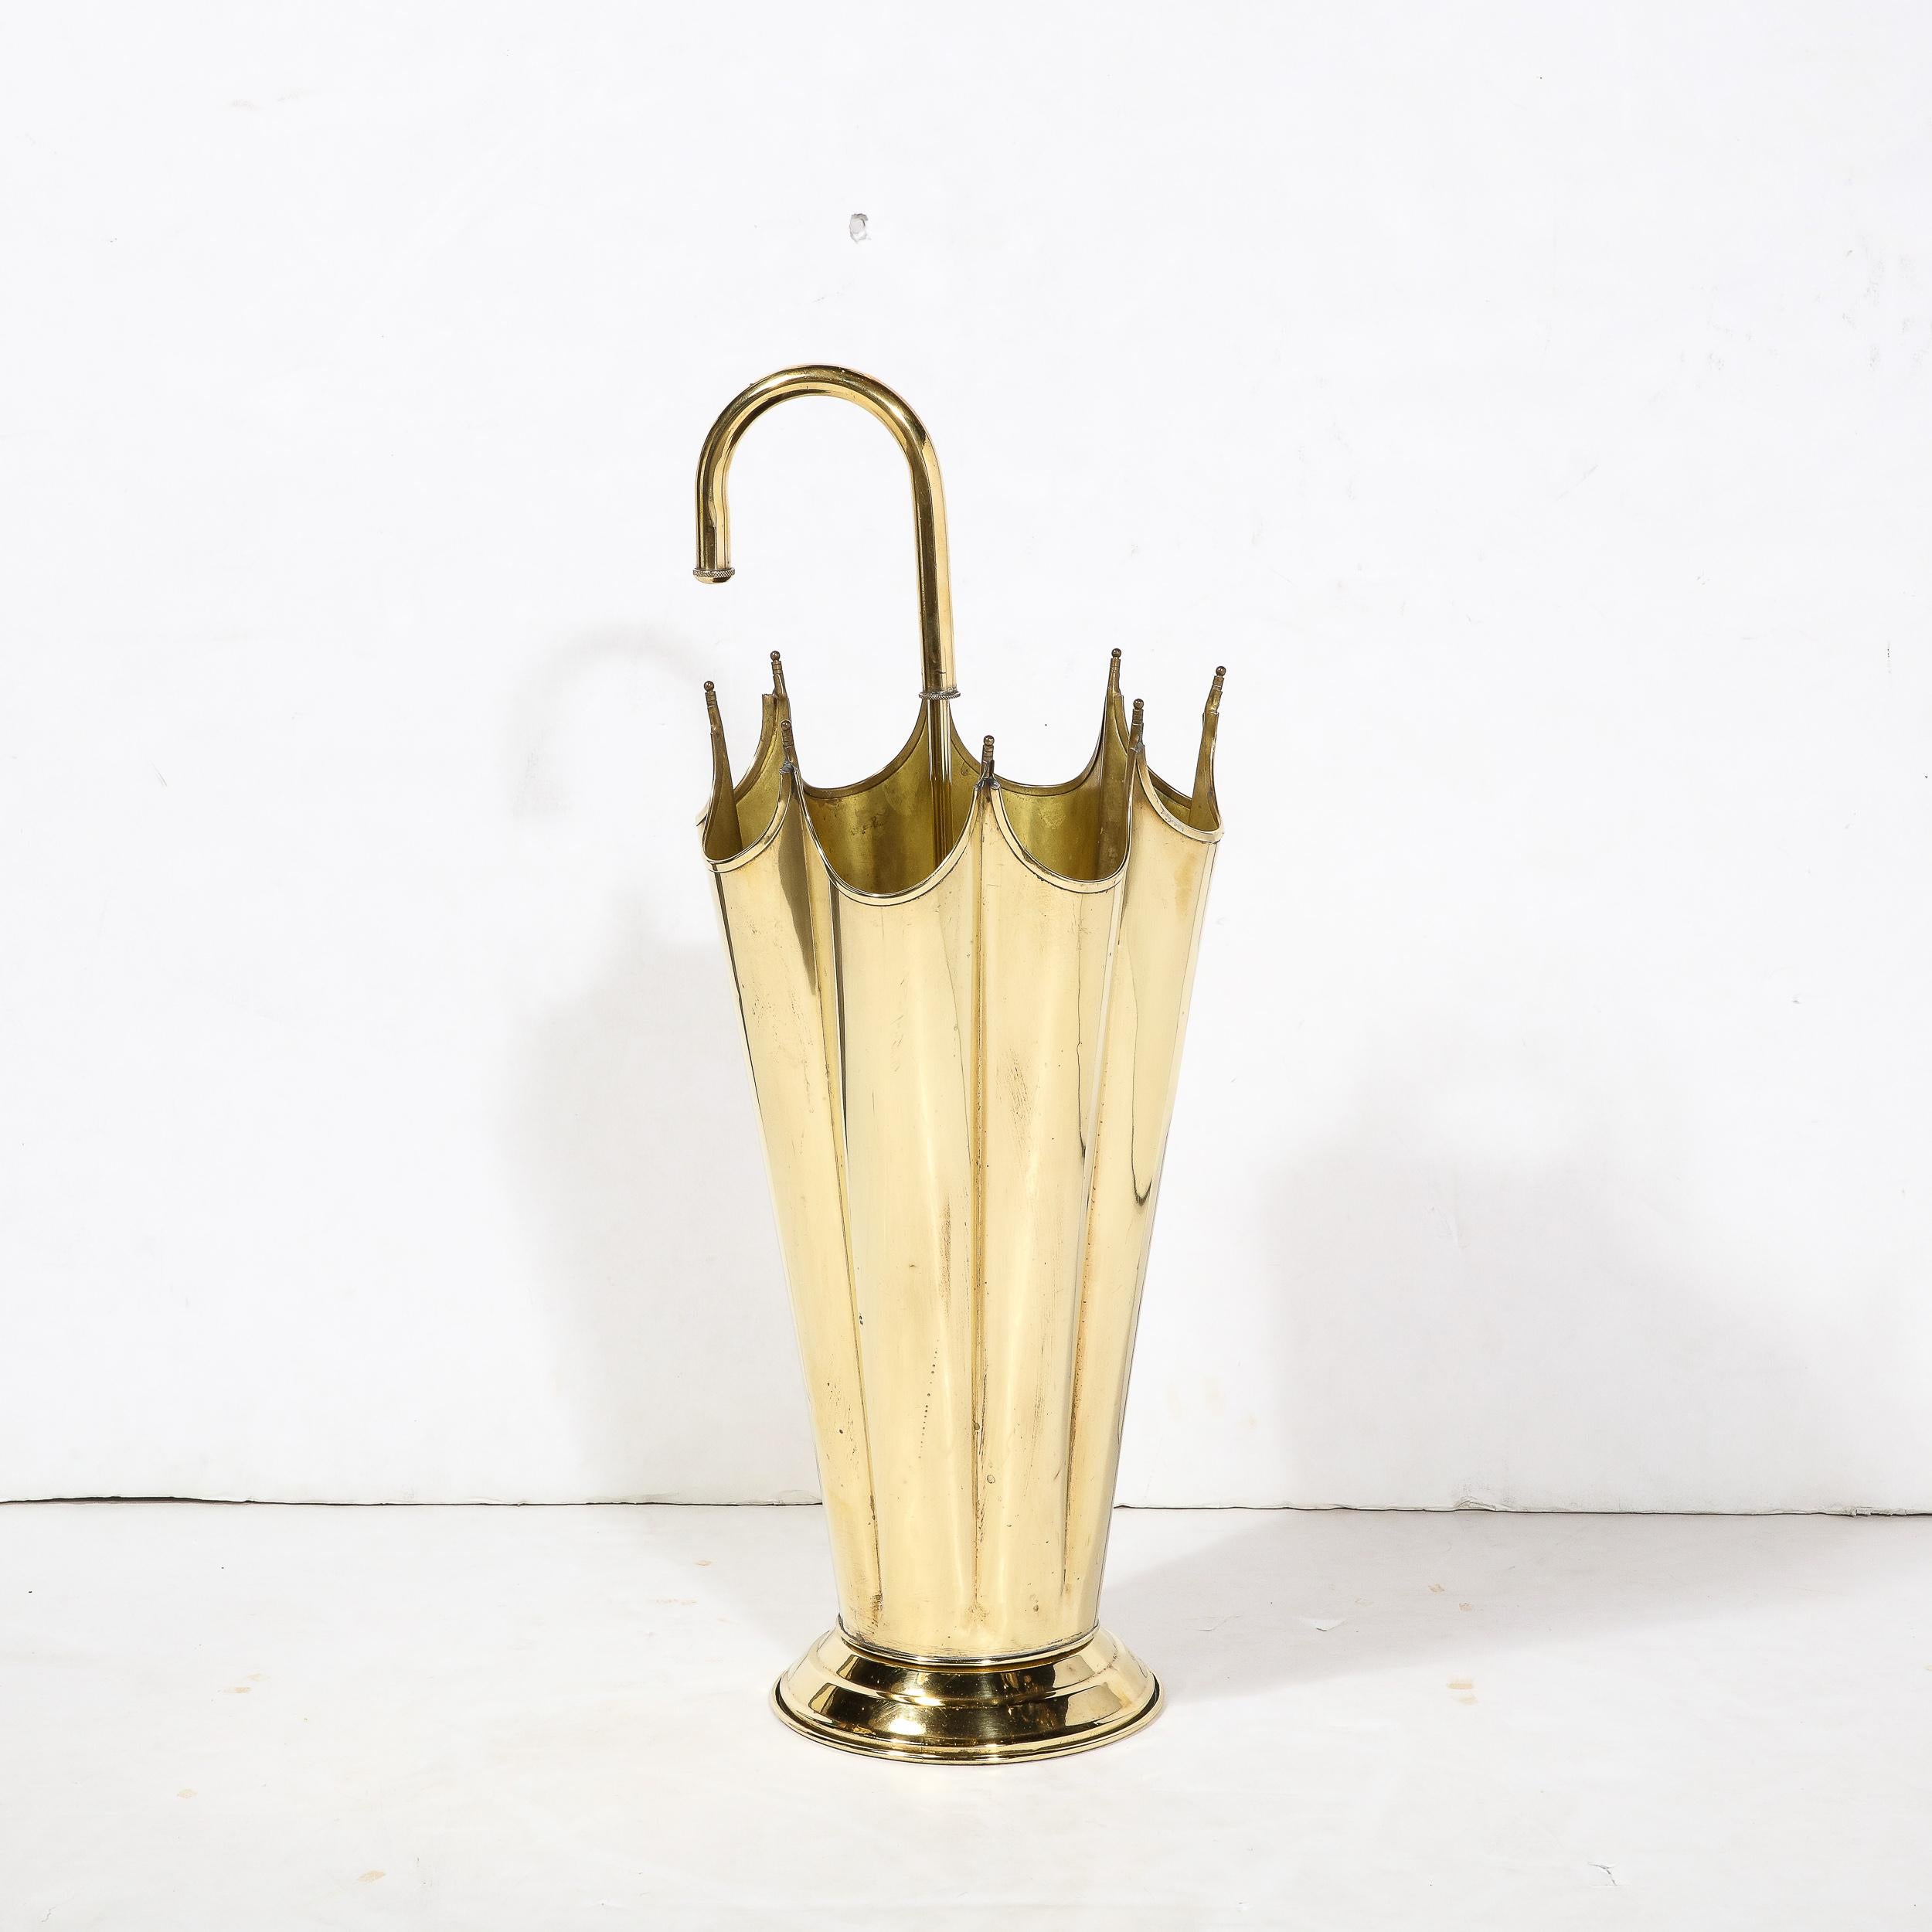 This Mid-Century Modernist Umbrella Stand is a charming and thematically apt piece rendered in extremely high quality brass work and with stunning attention to detail, originating from Austria, Circa 1950. The intended use is evident in the form of